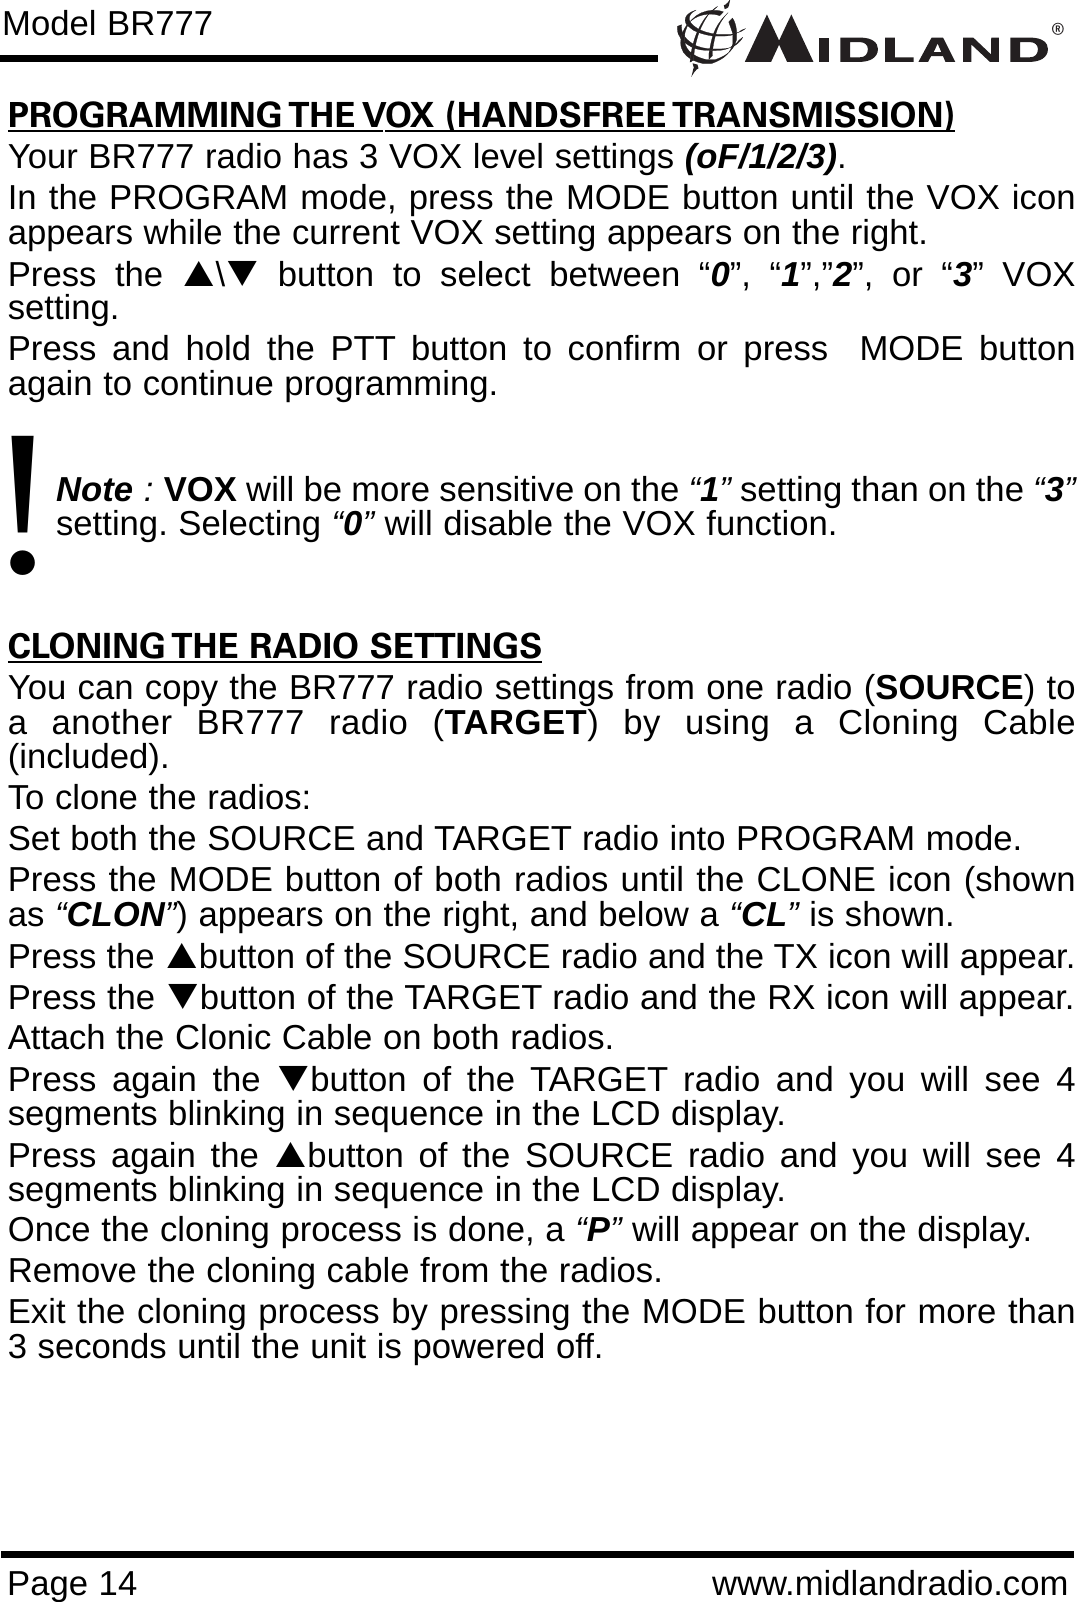 PROGRAMMING THE VOX (HANDSFREE TRANSMISSION)Your BR777 radio has 3 VOX level settings (oF/1/2/3).In the PROGRAM mode, press the MODE button until the VOX iconappears while the current VOX setting appears on the right.Press the S\Tbutton to select between “0”, “1”,”2”, or “3” VOXsetting.Press and hold the PTT button to confirm or press  MODE buttonagain to continue programming.  Note :VOX will be more sensitive on the “1”setting than on the “3”setting. Selecting “0”will disable the VOX function.CLONING THE RADIO SETTINGSYou can copy the BR777 radio settings from one radio (SOURCE) toa another BR777 radio (TARGET) by using a Cloning Cable(included).To clone the radios:Set both the SOURCE and TARGET radio into PROGRAM mode.Press the MODE button of both radios until the CLONE icon (shownas “CLON”) appears on the right, and below a “CL”is shown.Press the Sbutton of the SOURCE radio and the TX icon will appear. Press the Tbutton of the TARGET radio and the RX icon will appear.Attach the Clonic Cable on both radios.Press again the Tbutton of the TARGET radio and you will see 4segments blinking in sequence in the LCD display. Press again the Sbutton of the SOURCE radio and you will see 4segments blinking in sequence in the LCD display.Once the cloning process is done, a “P”will appear on the display.Remove the cloning cable from the radios.Exit the cloning process by pressing the MODE button for more than3 seconds until the unit is powered off.®Page 14 www.midlandradio.comModel BR777!